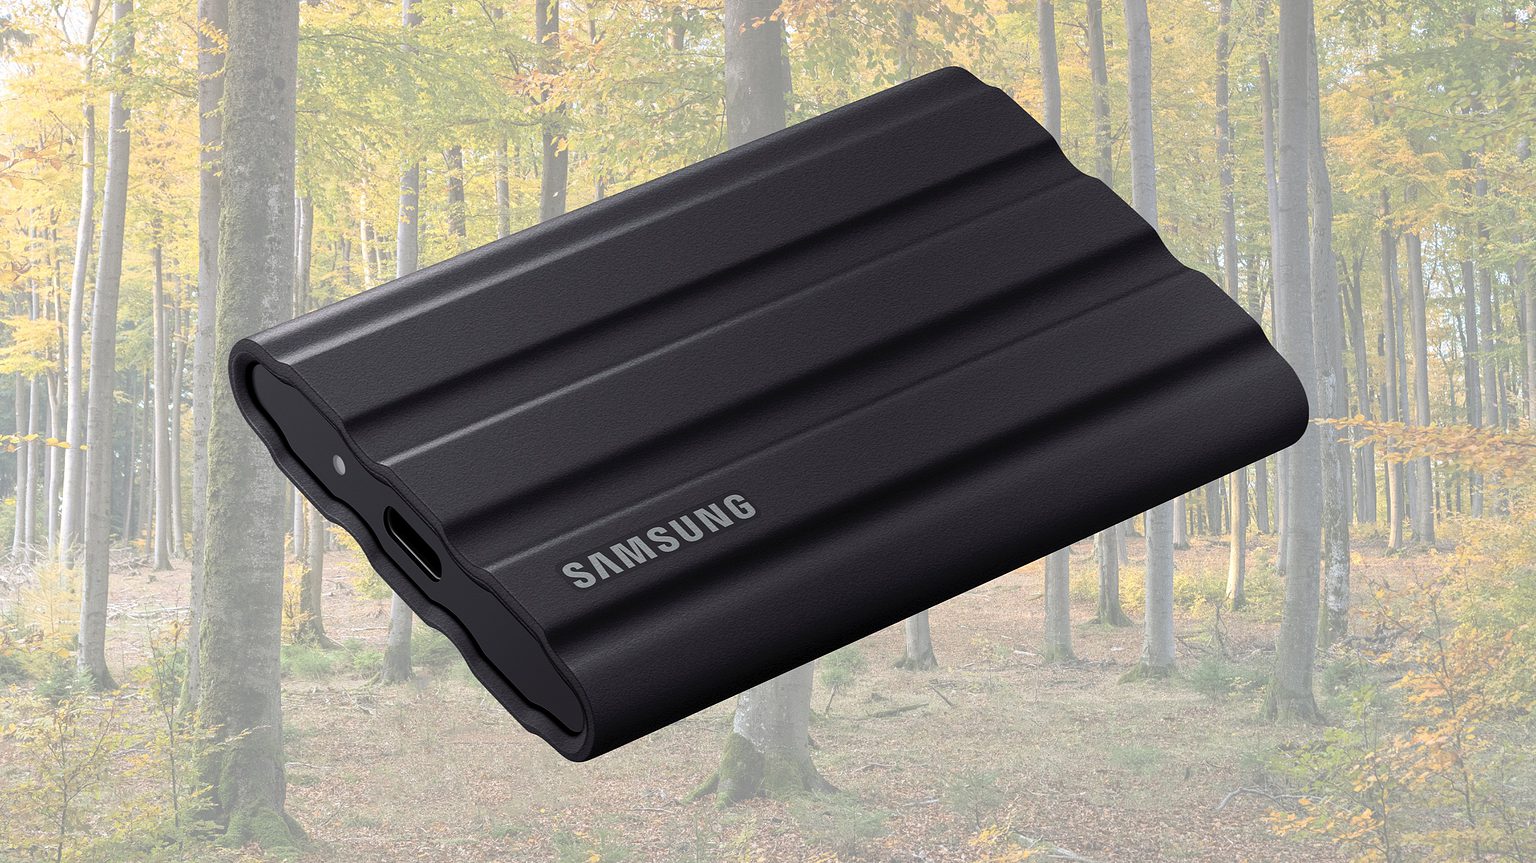 Rugged Samsung SSD expands to 4TB of storage